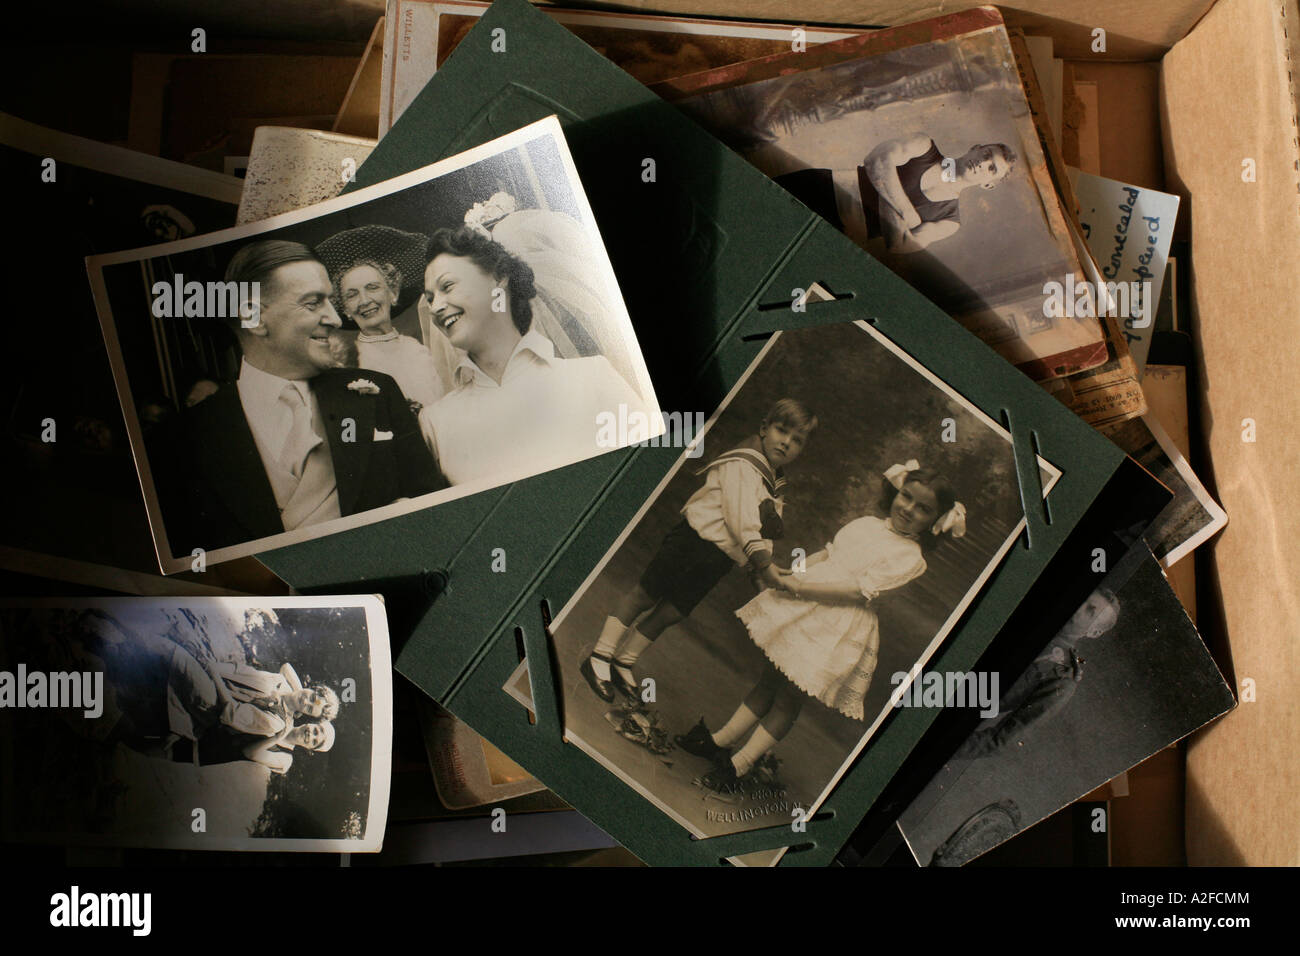 A box of old photographs from yesteryear Stock Photo